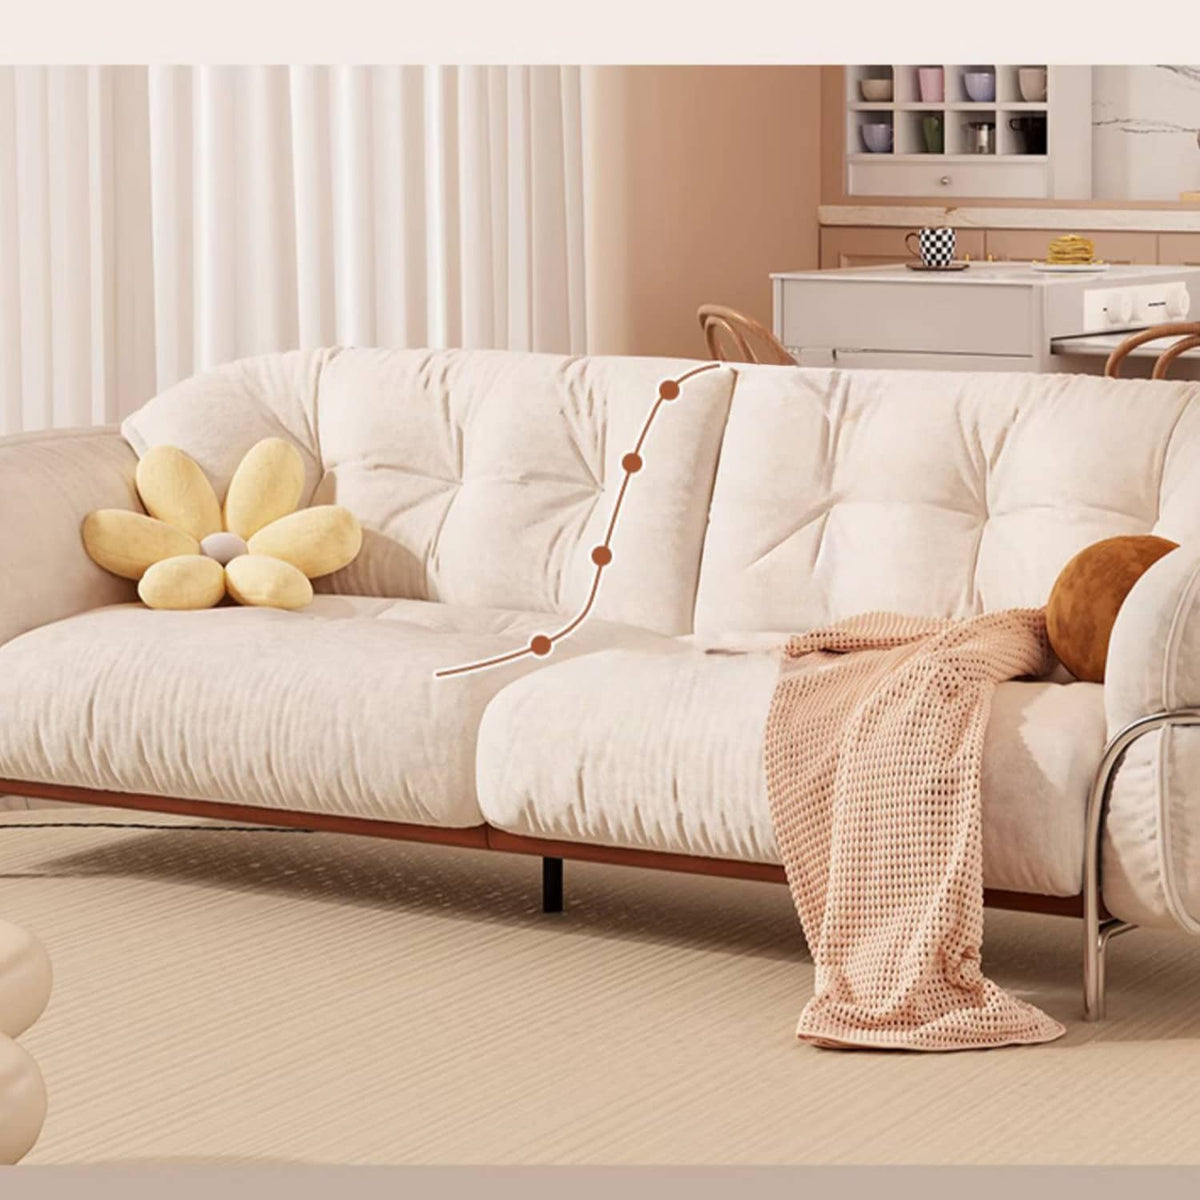 Elegant Beige Cotton Sofa with Pine Wood Frame and Stainless Steel Accents fbby-1403